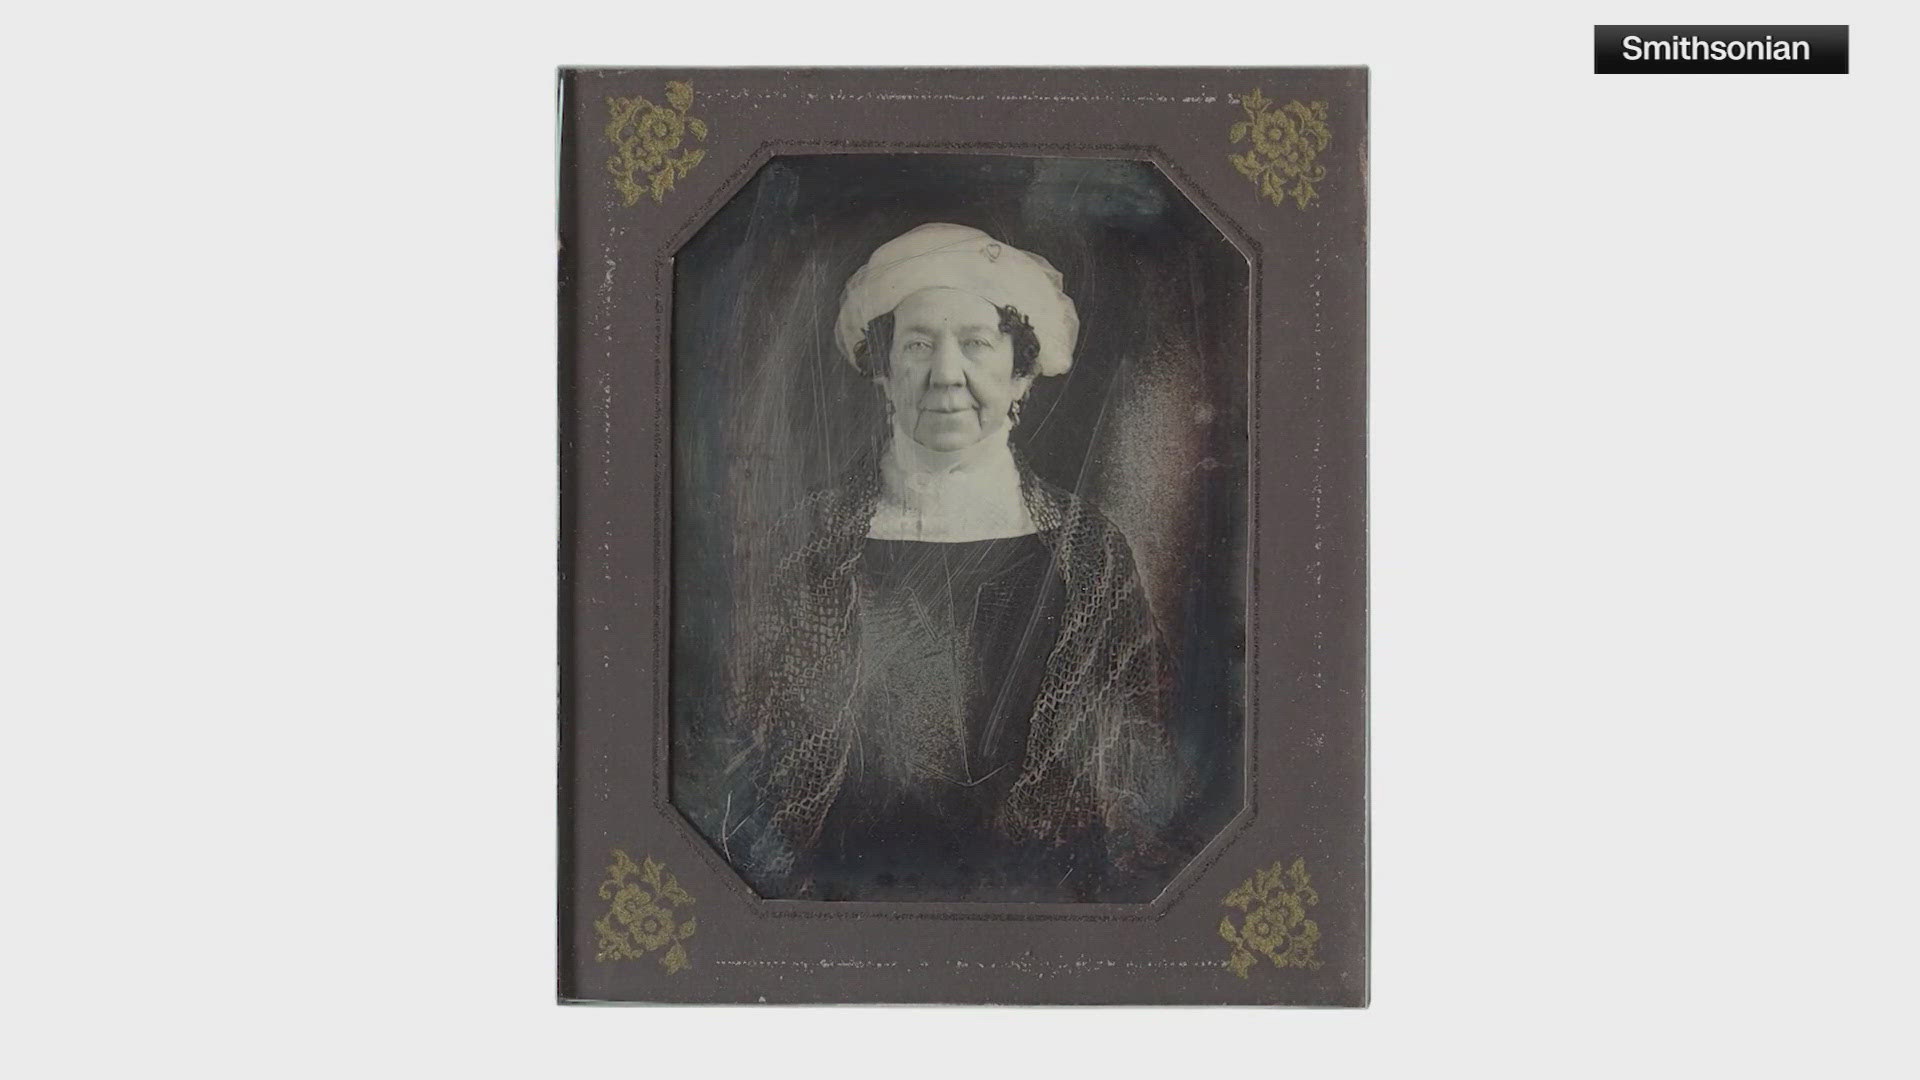 They purchased this picture of former First Lady Dolley Madison -- the earliest known photo of a first lady. Historians think it was taken in 1846.